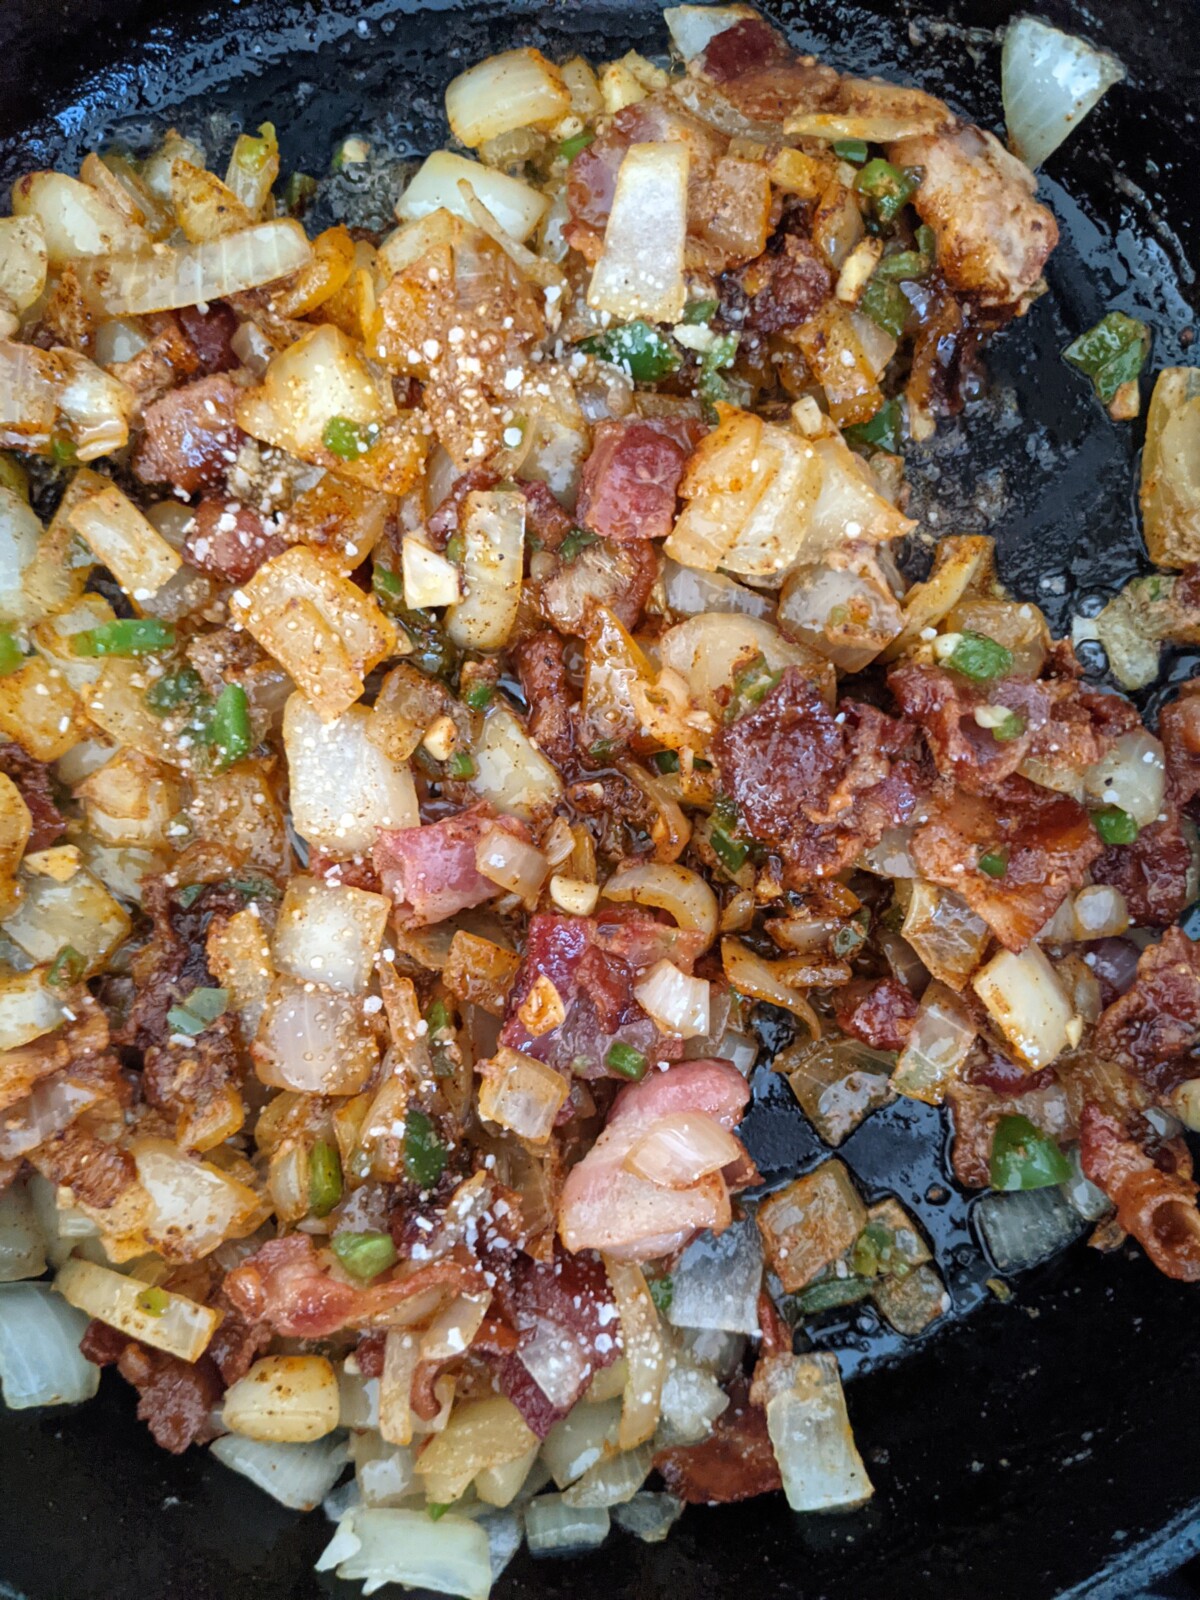 Showing spices in skillet with sautéed veggies and bacon for sloppy joes.